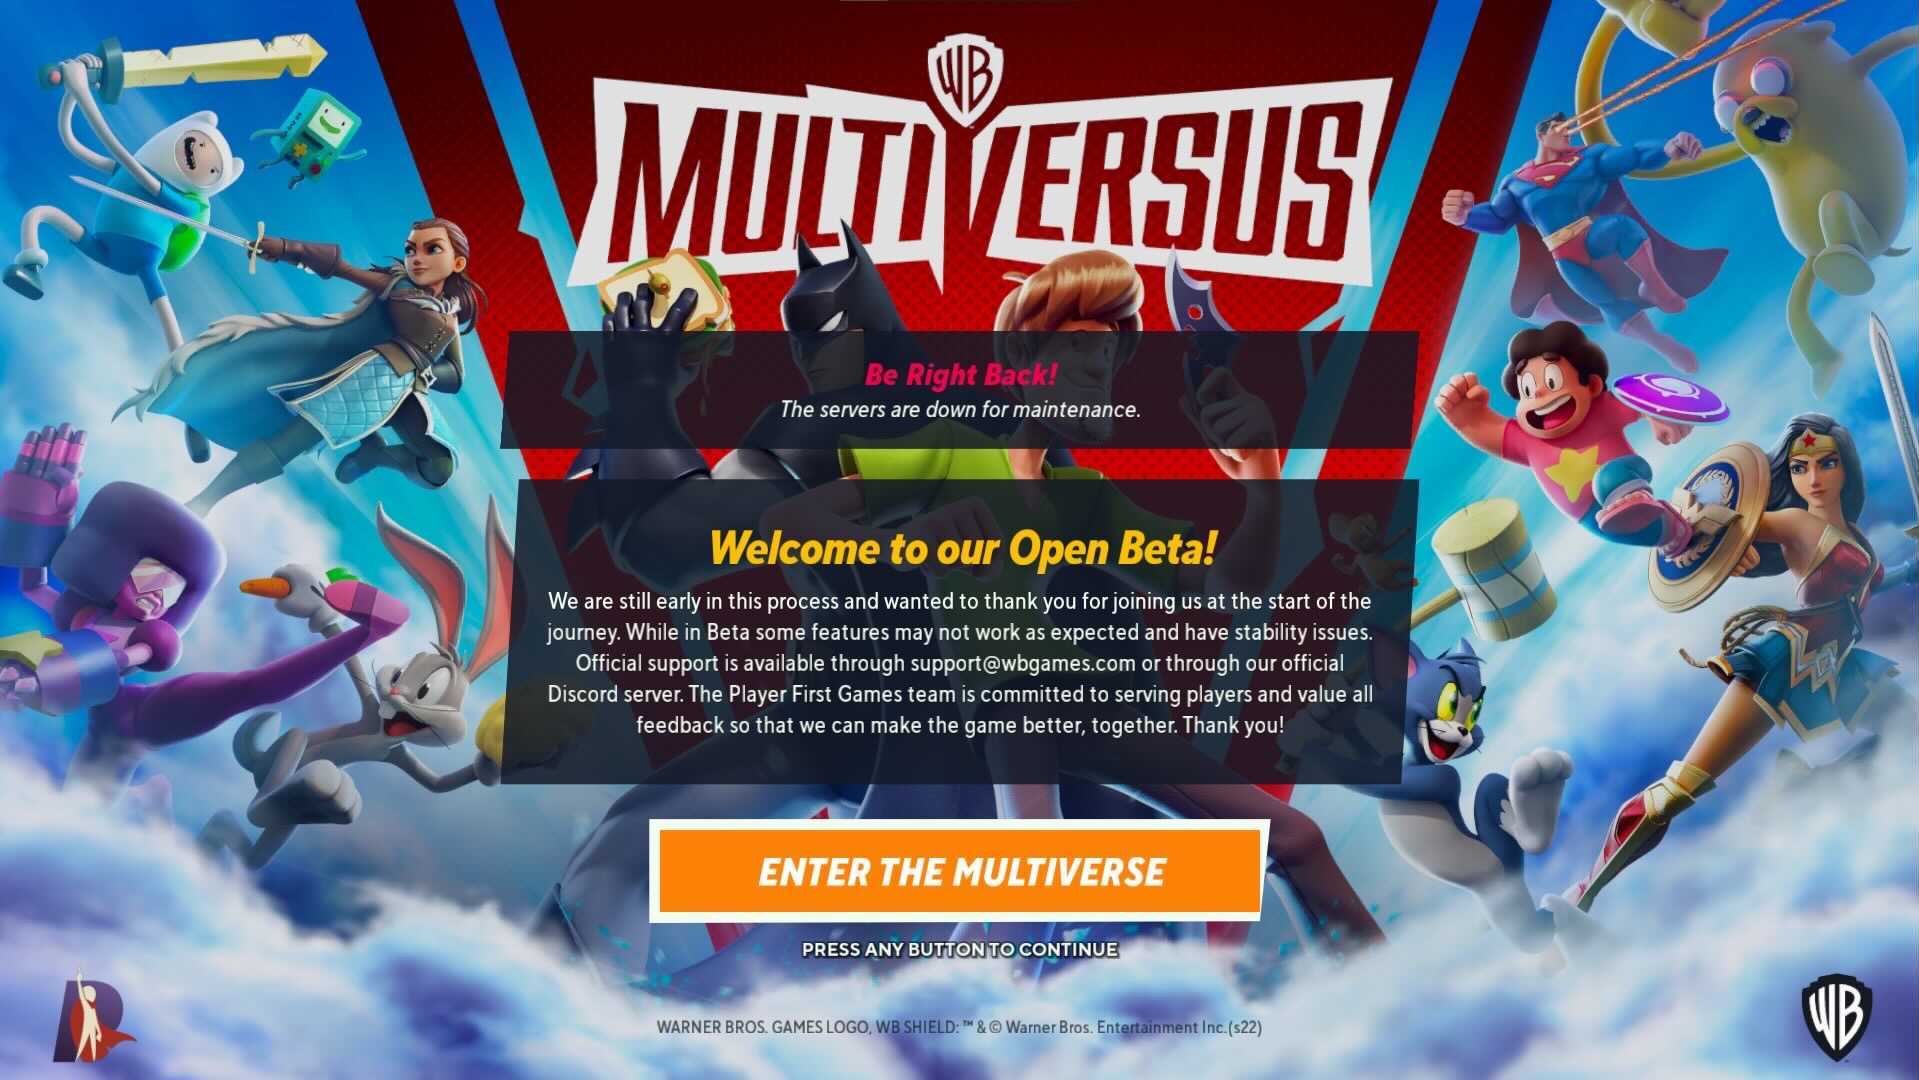 How To Create & Connect WB Games Account In Multiversus